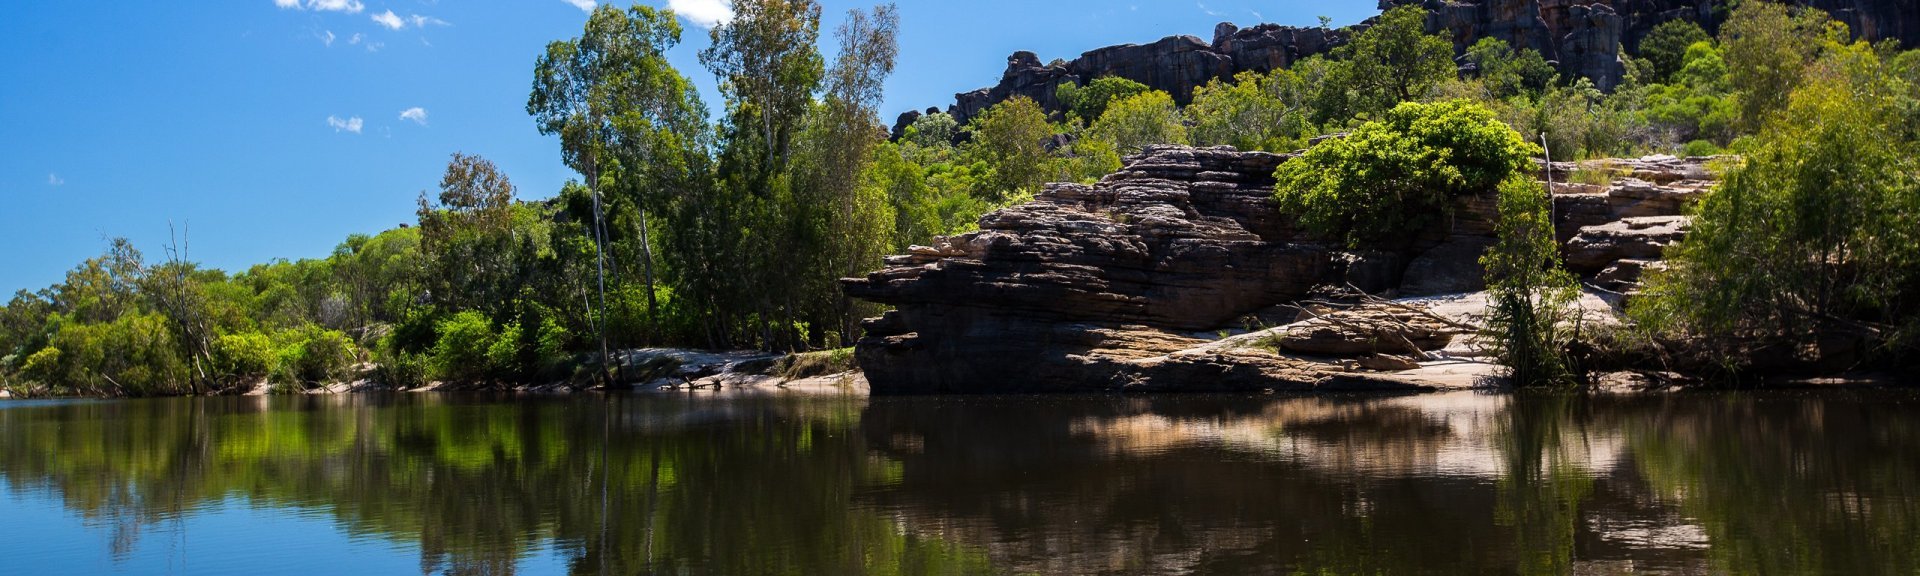 page banner image for article titled: The archaeology of Bindjarran rockshelter in Manilikarr Country, Kakadu National Park, Northern Territory